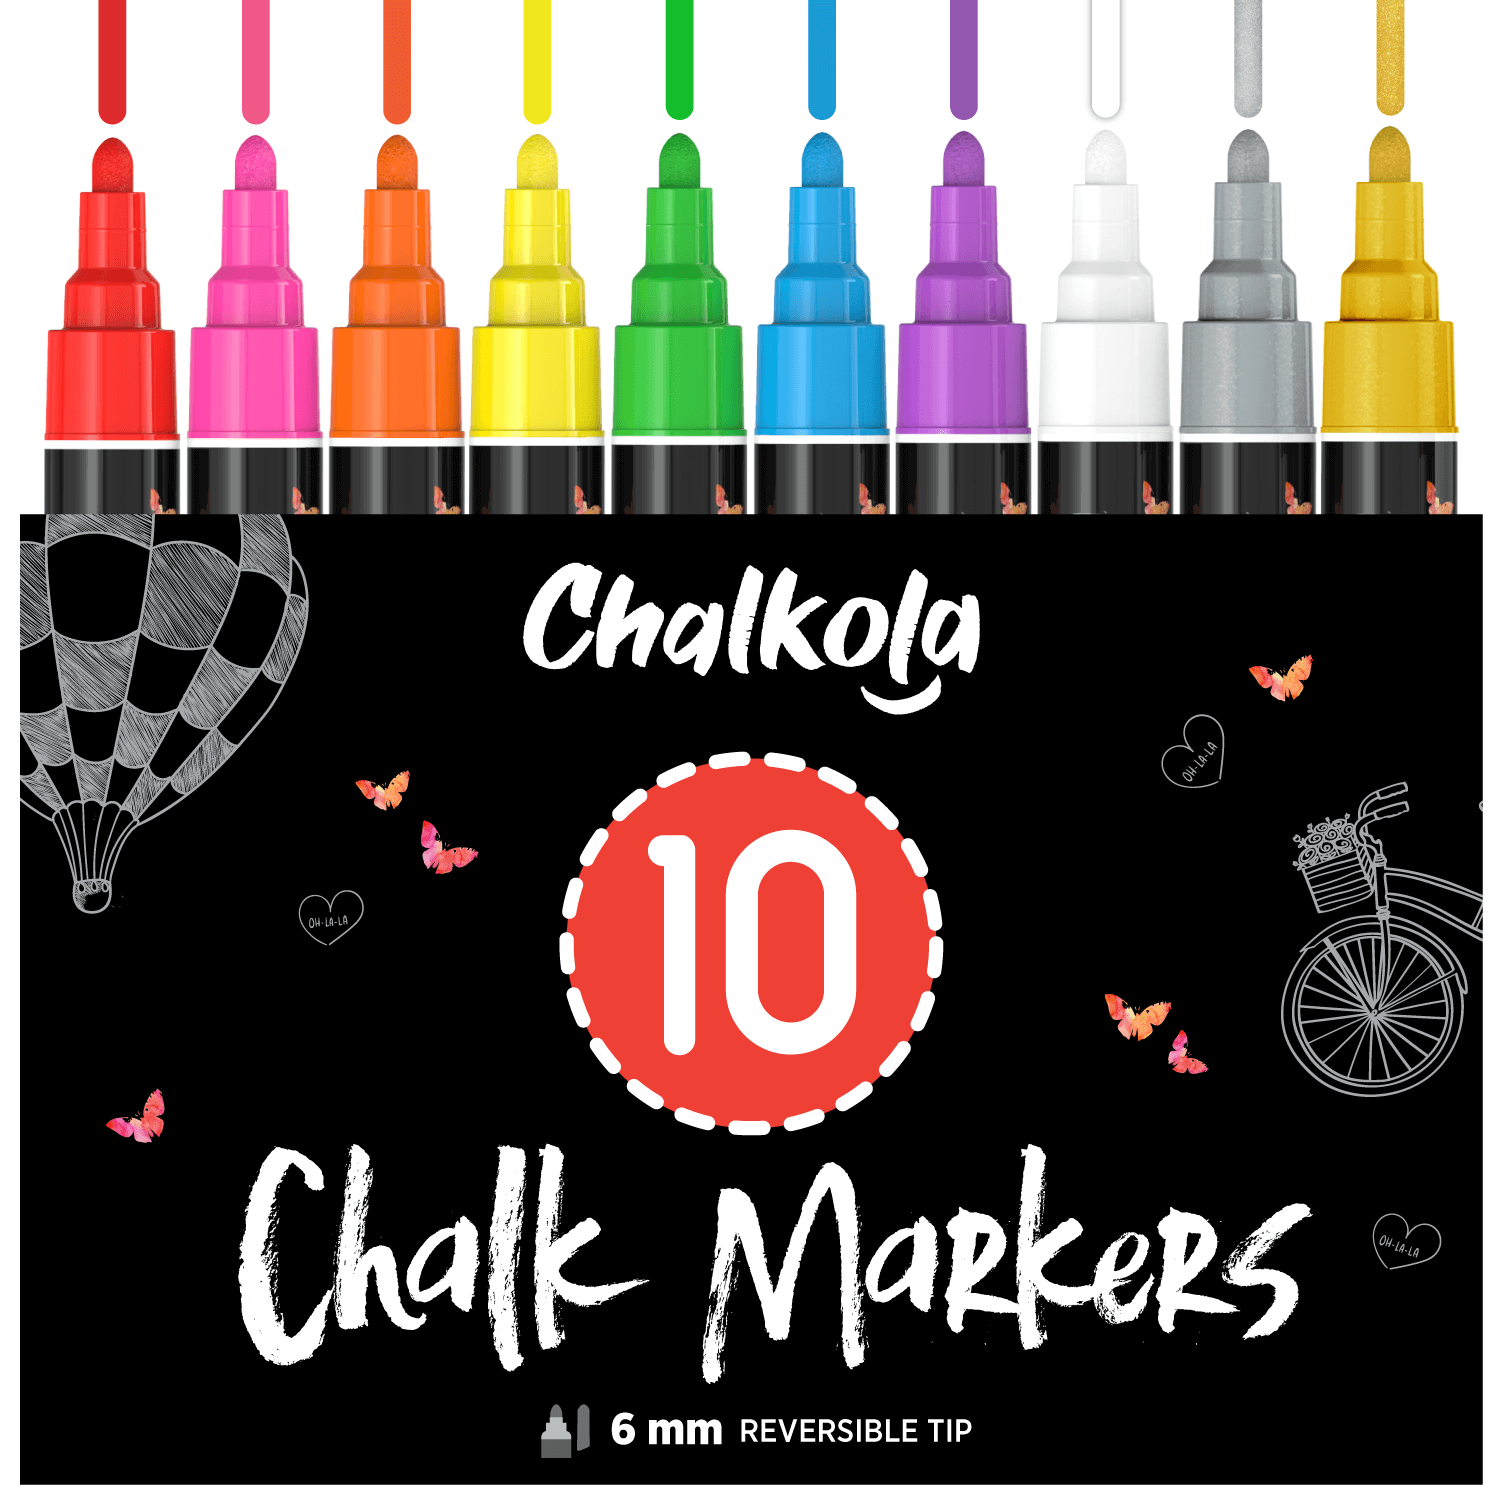 Liquid Chalk Markers (10 Pack) with Gold & Silver - 6mm Reversible Nib